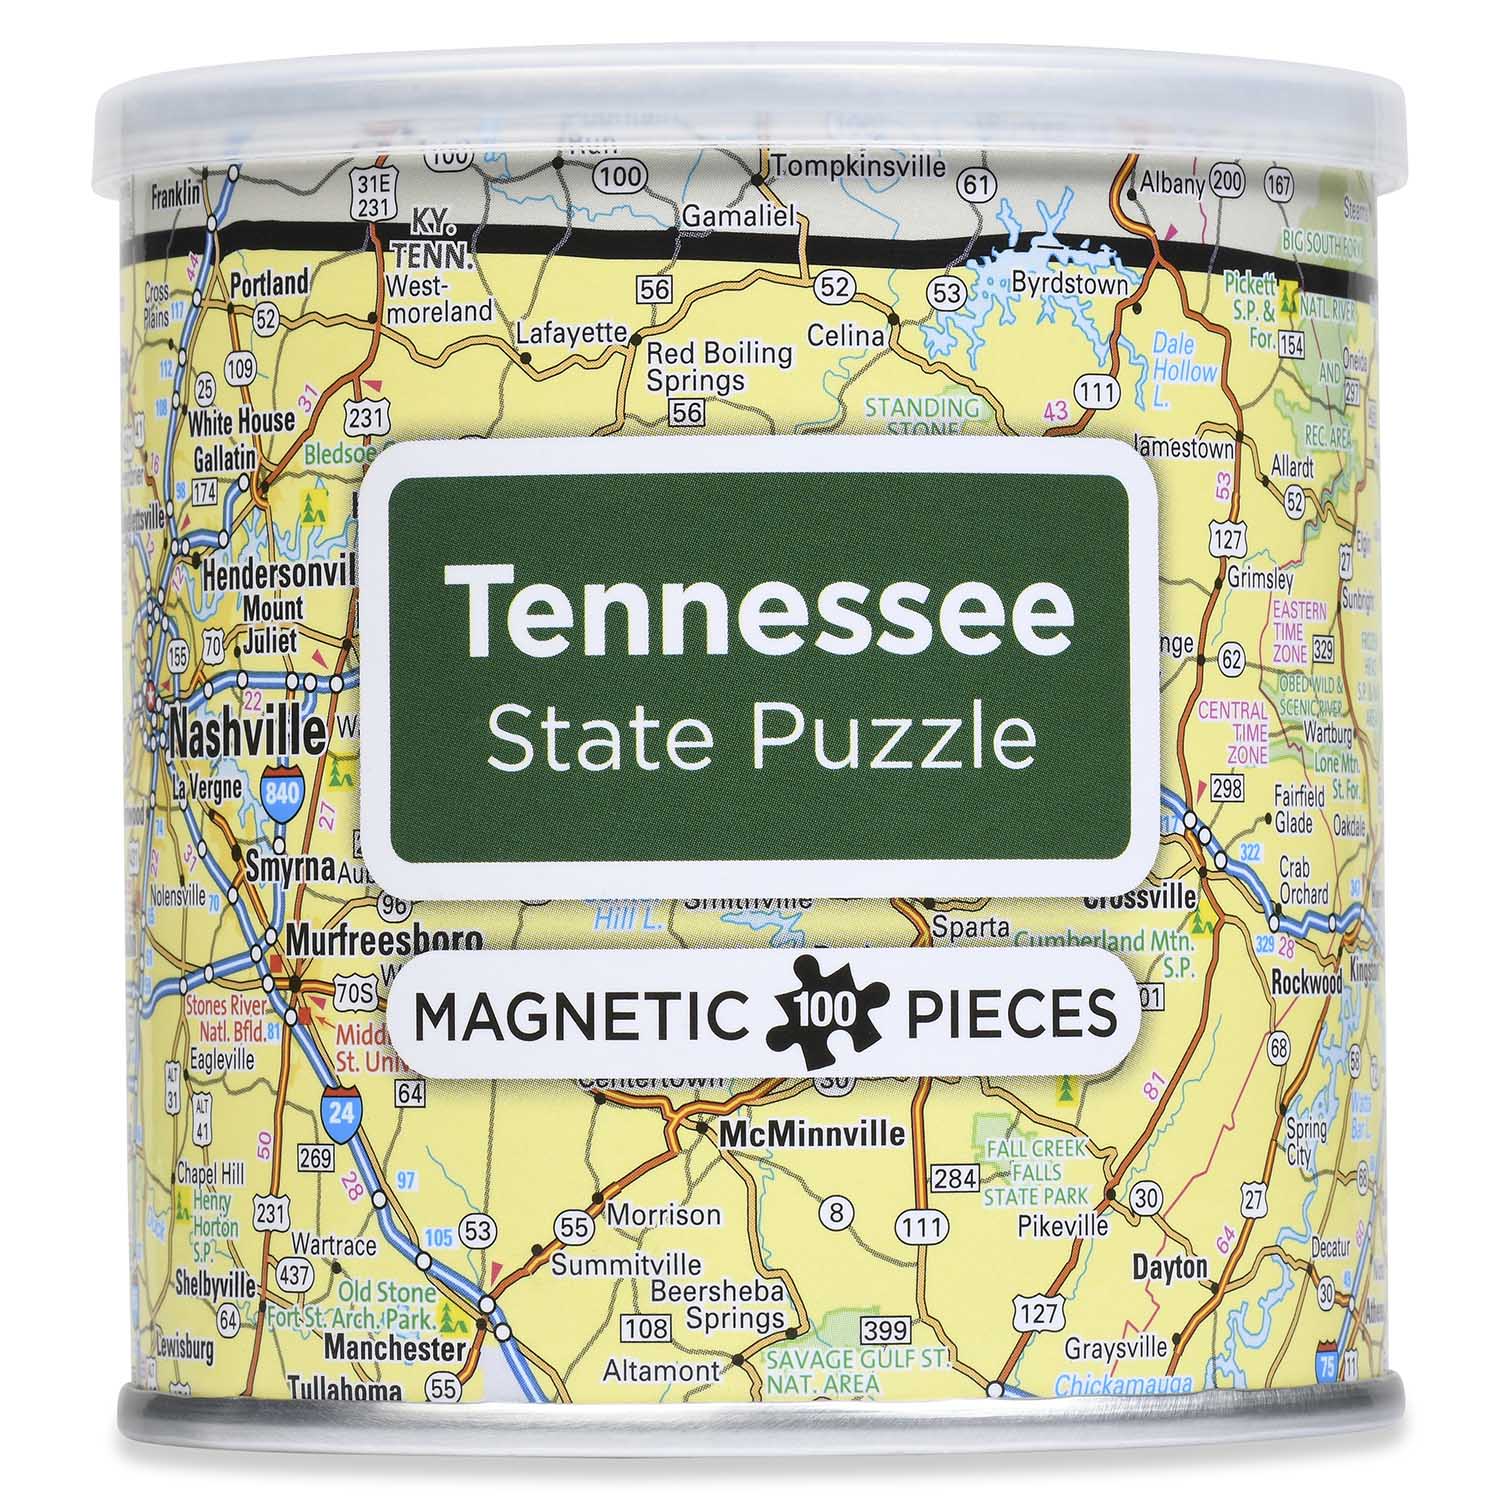 City Magnetic Puzzle Tennessee Jigsaw Puzzle